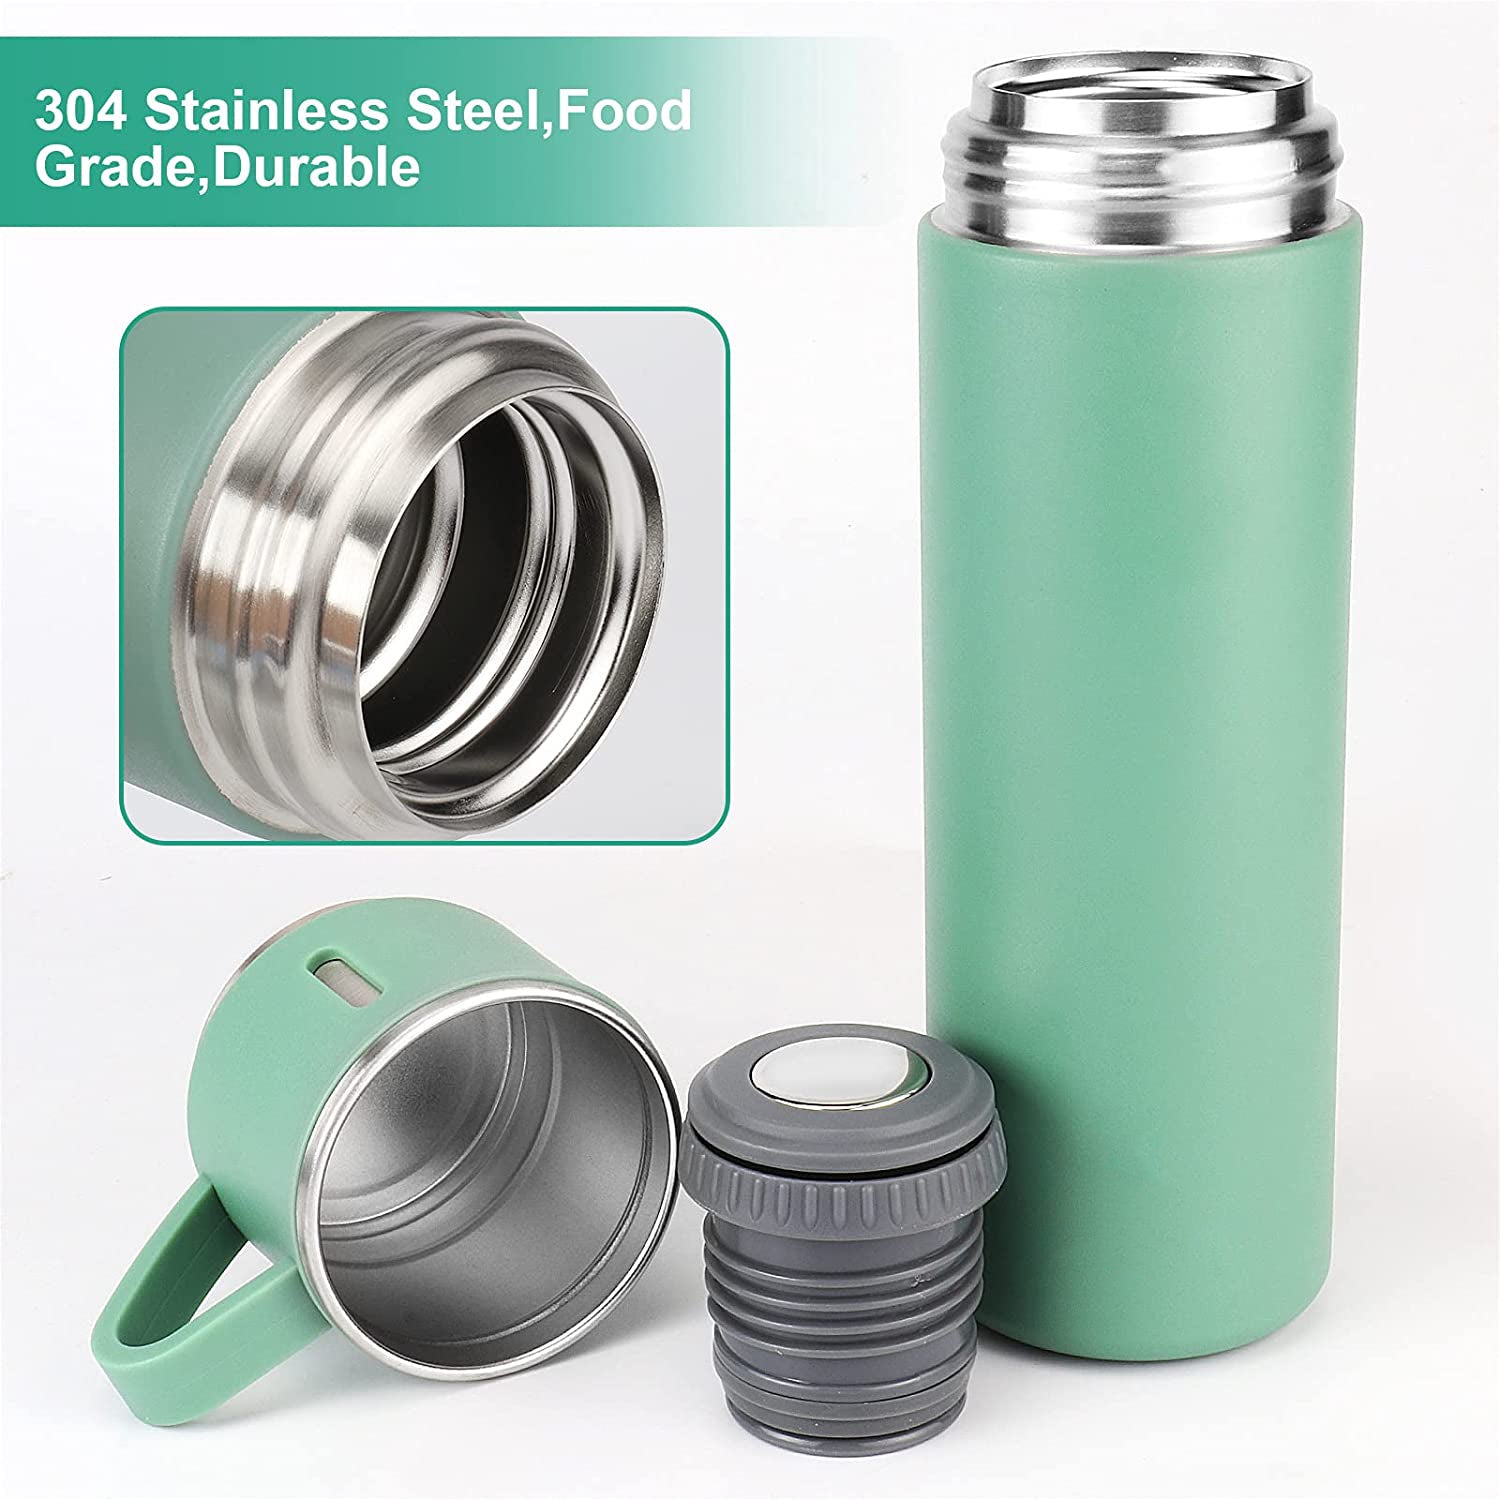 2834 Stainless Steel Vacuum Flask Set with 3 Steel Cups Combo for Coffee Hot Drink and Cold Water Flask Ideal Gifting Travel Friendly Latest Flask Bottle. (500ml)